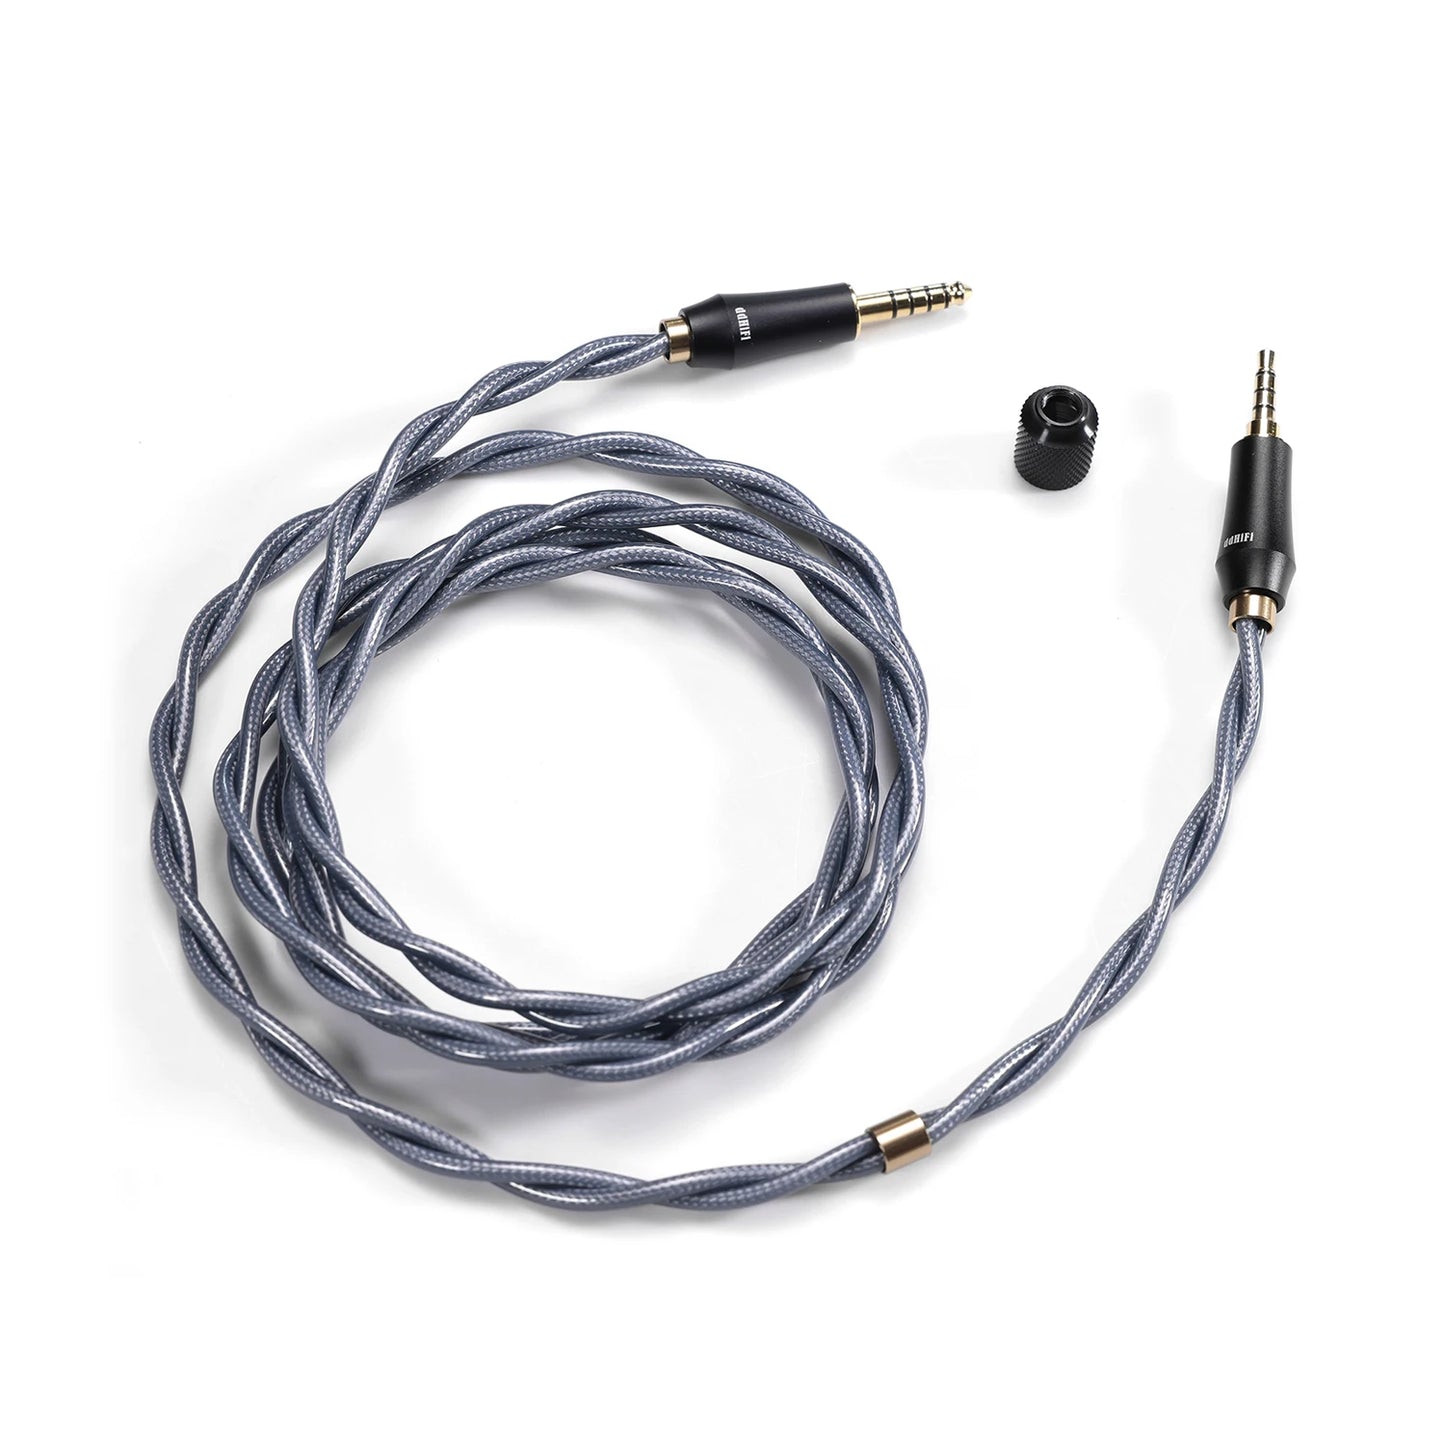 ddHiFi BC150B-MV Double Shielded Silver Headphones Cable for Sony MDR-MV1